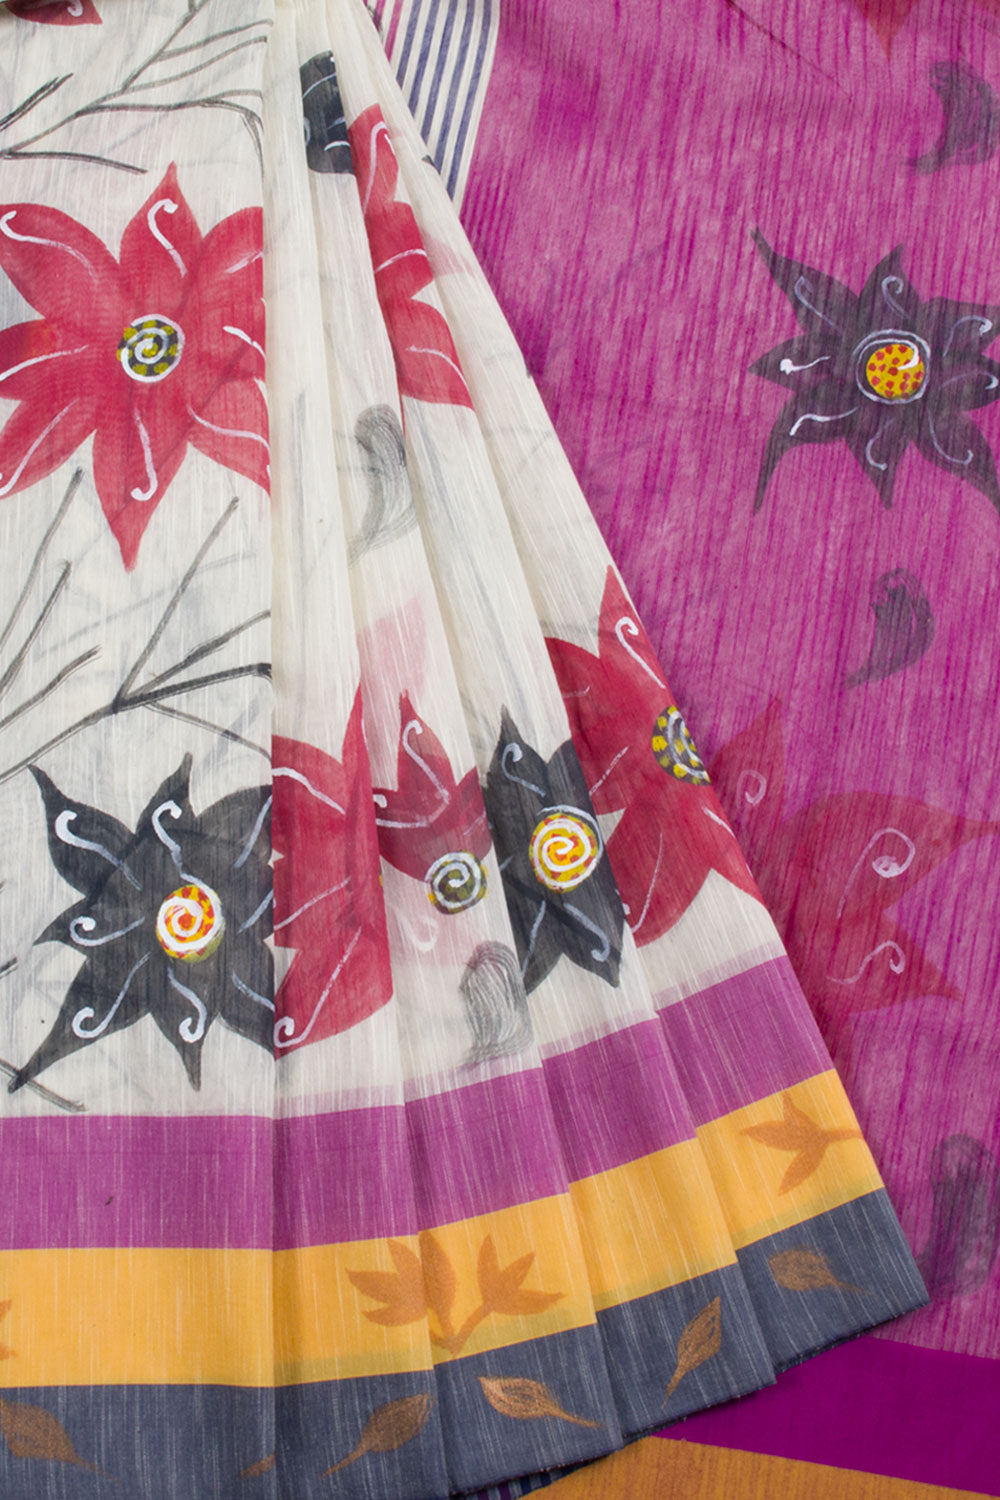 Handloom Bengal Cotton Saree With Hand Painted Floral Motifs Multi Colour Border